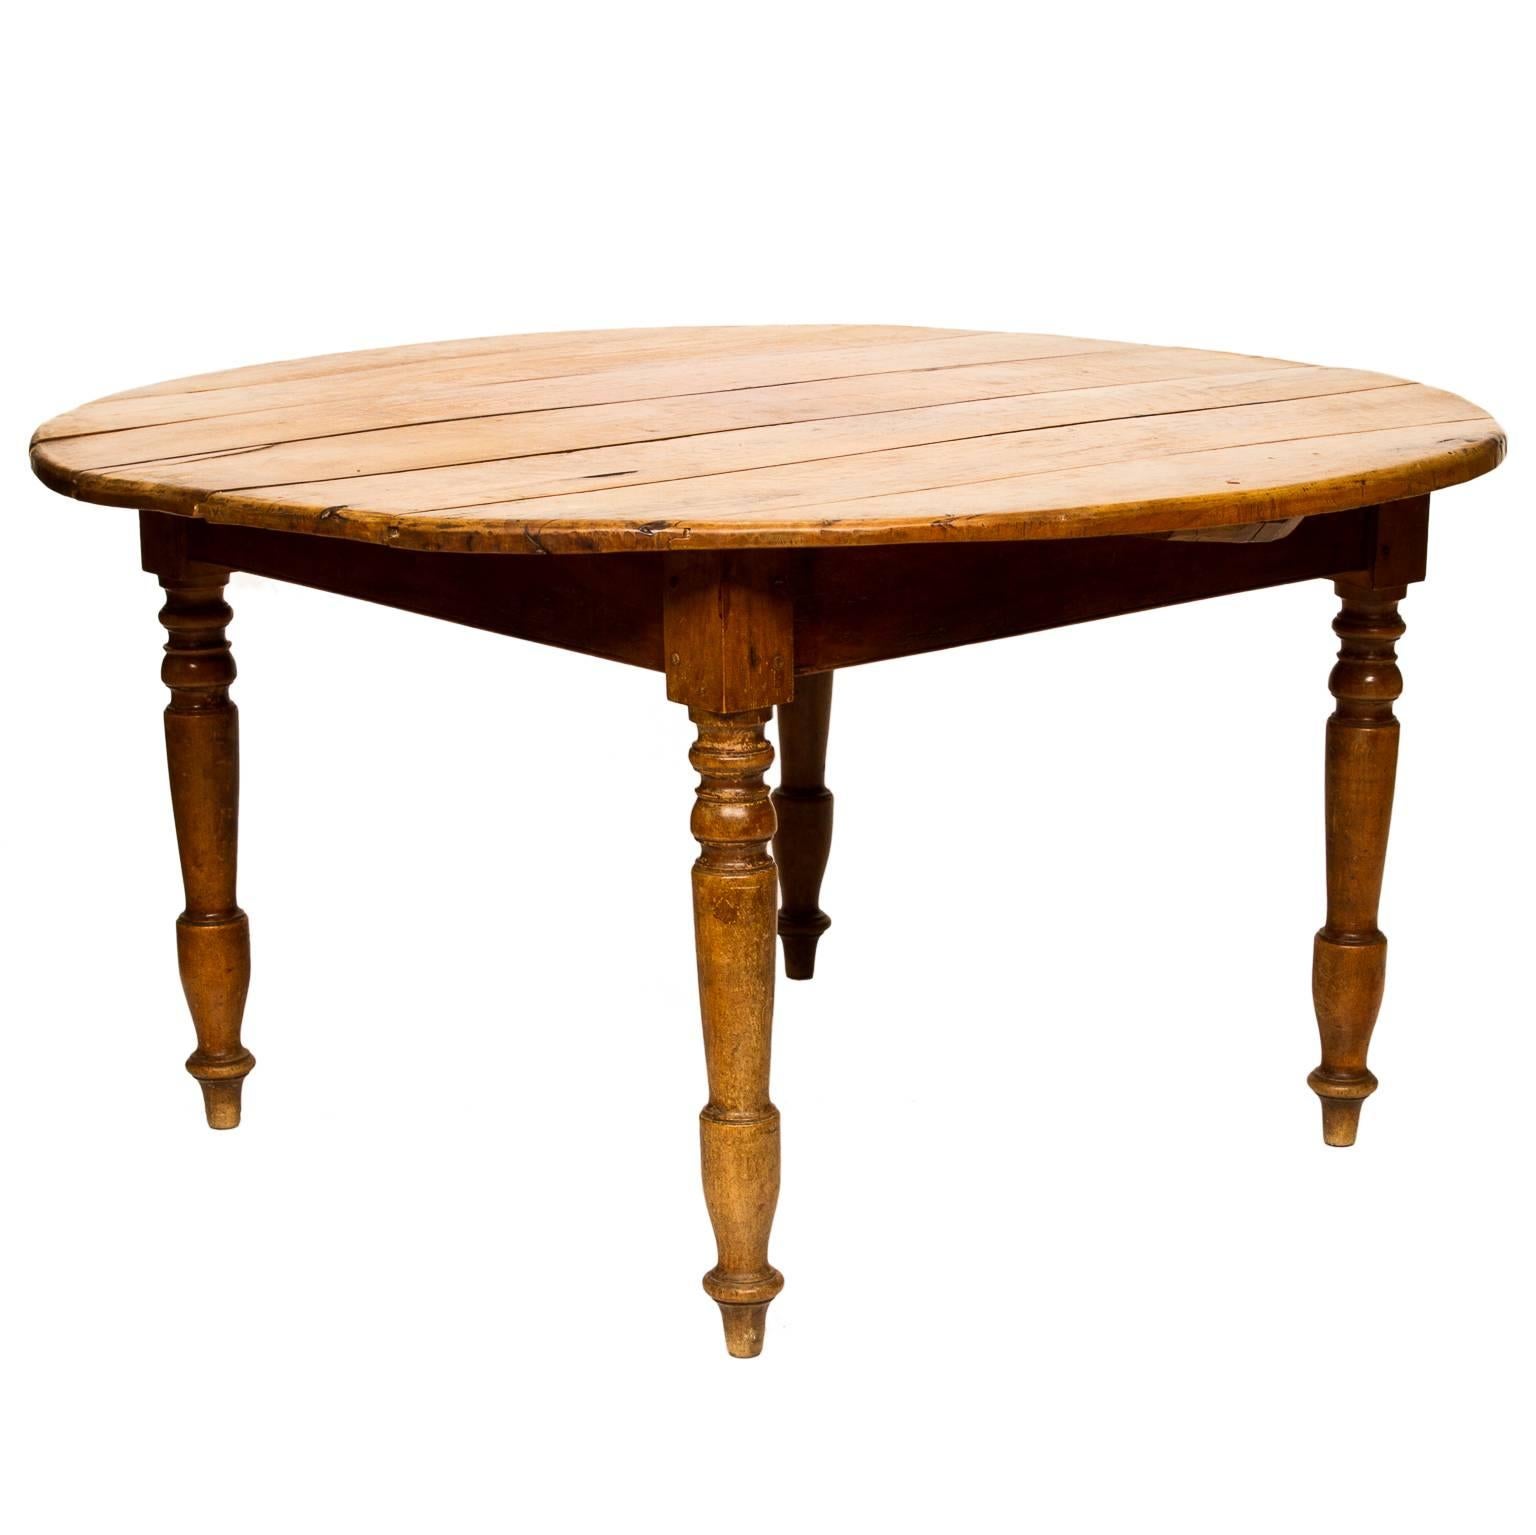 Country 19th Century Cherrywood Round Dining Table